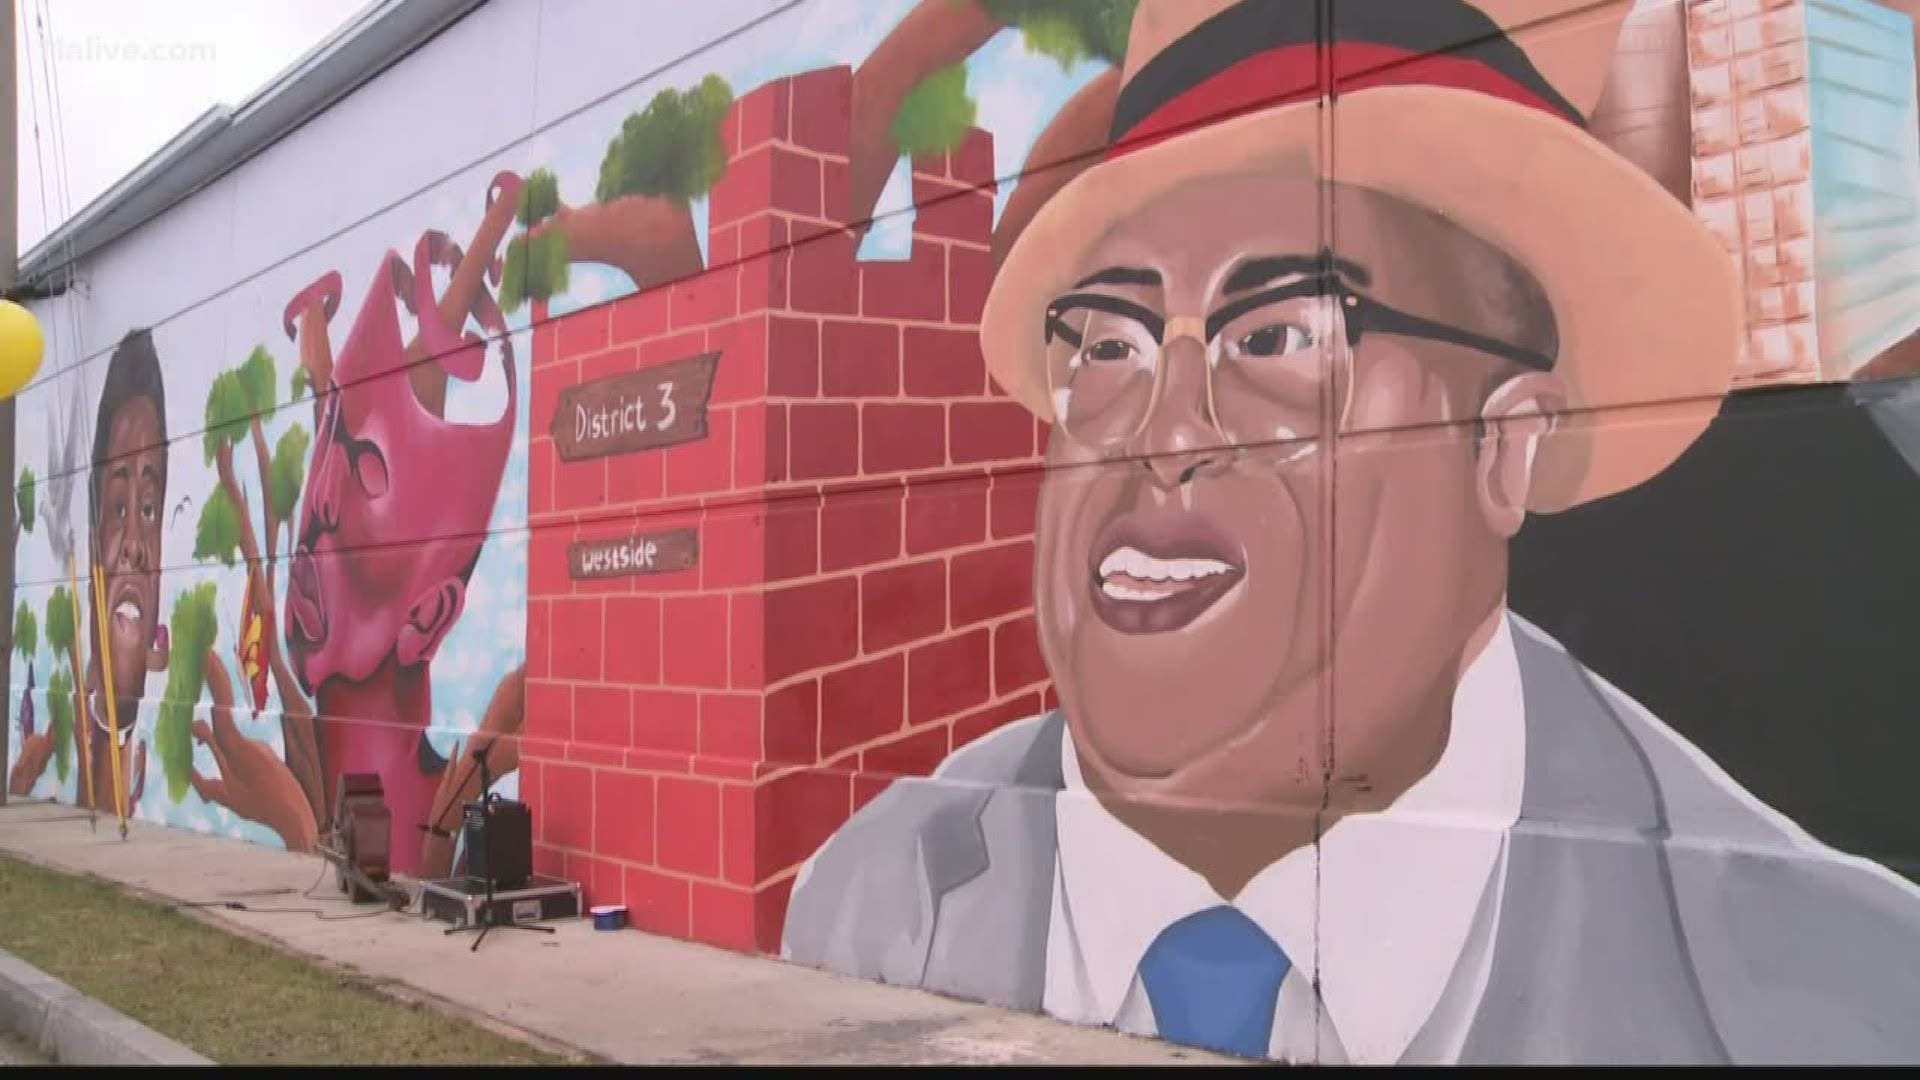 Here's a look at the mural in northwest Atlanta.